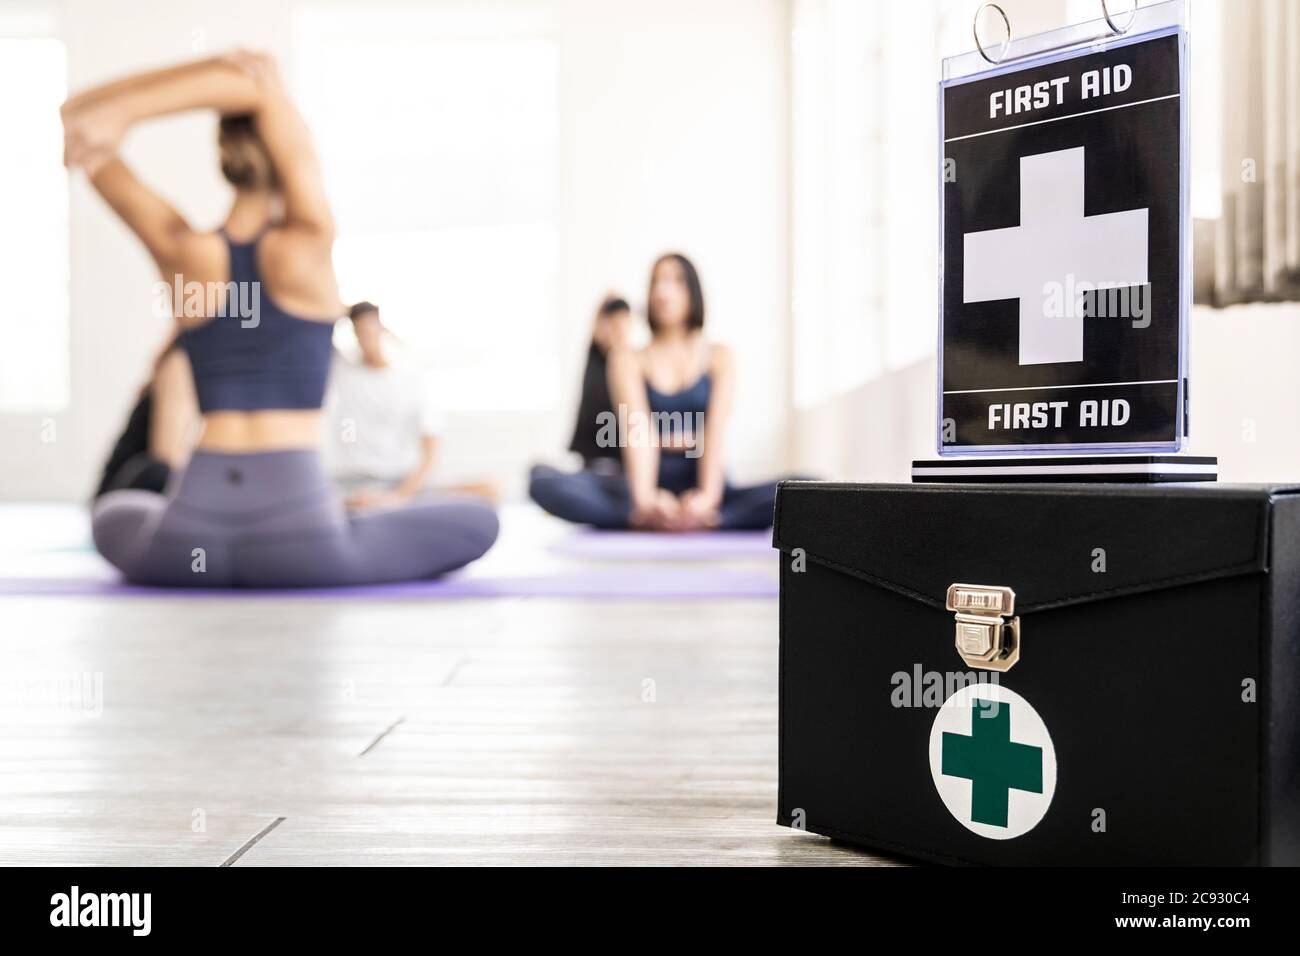 First aid box with its signage for safety in fitness gym with background of yoga class students and trainer. Healthy lifestyle and safety first sport Stock Photo